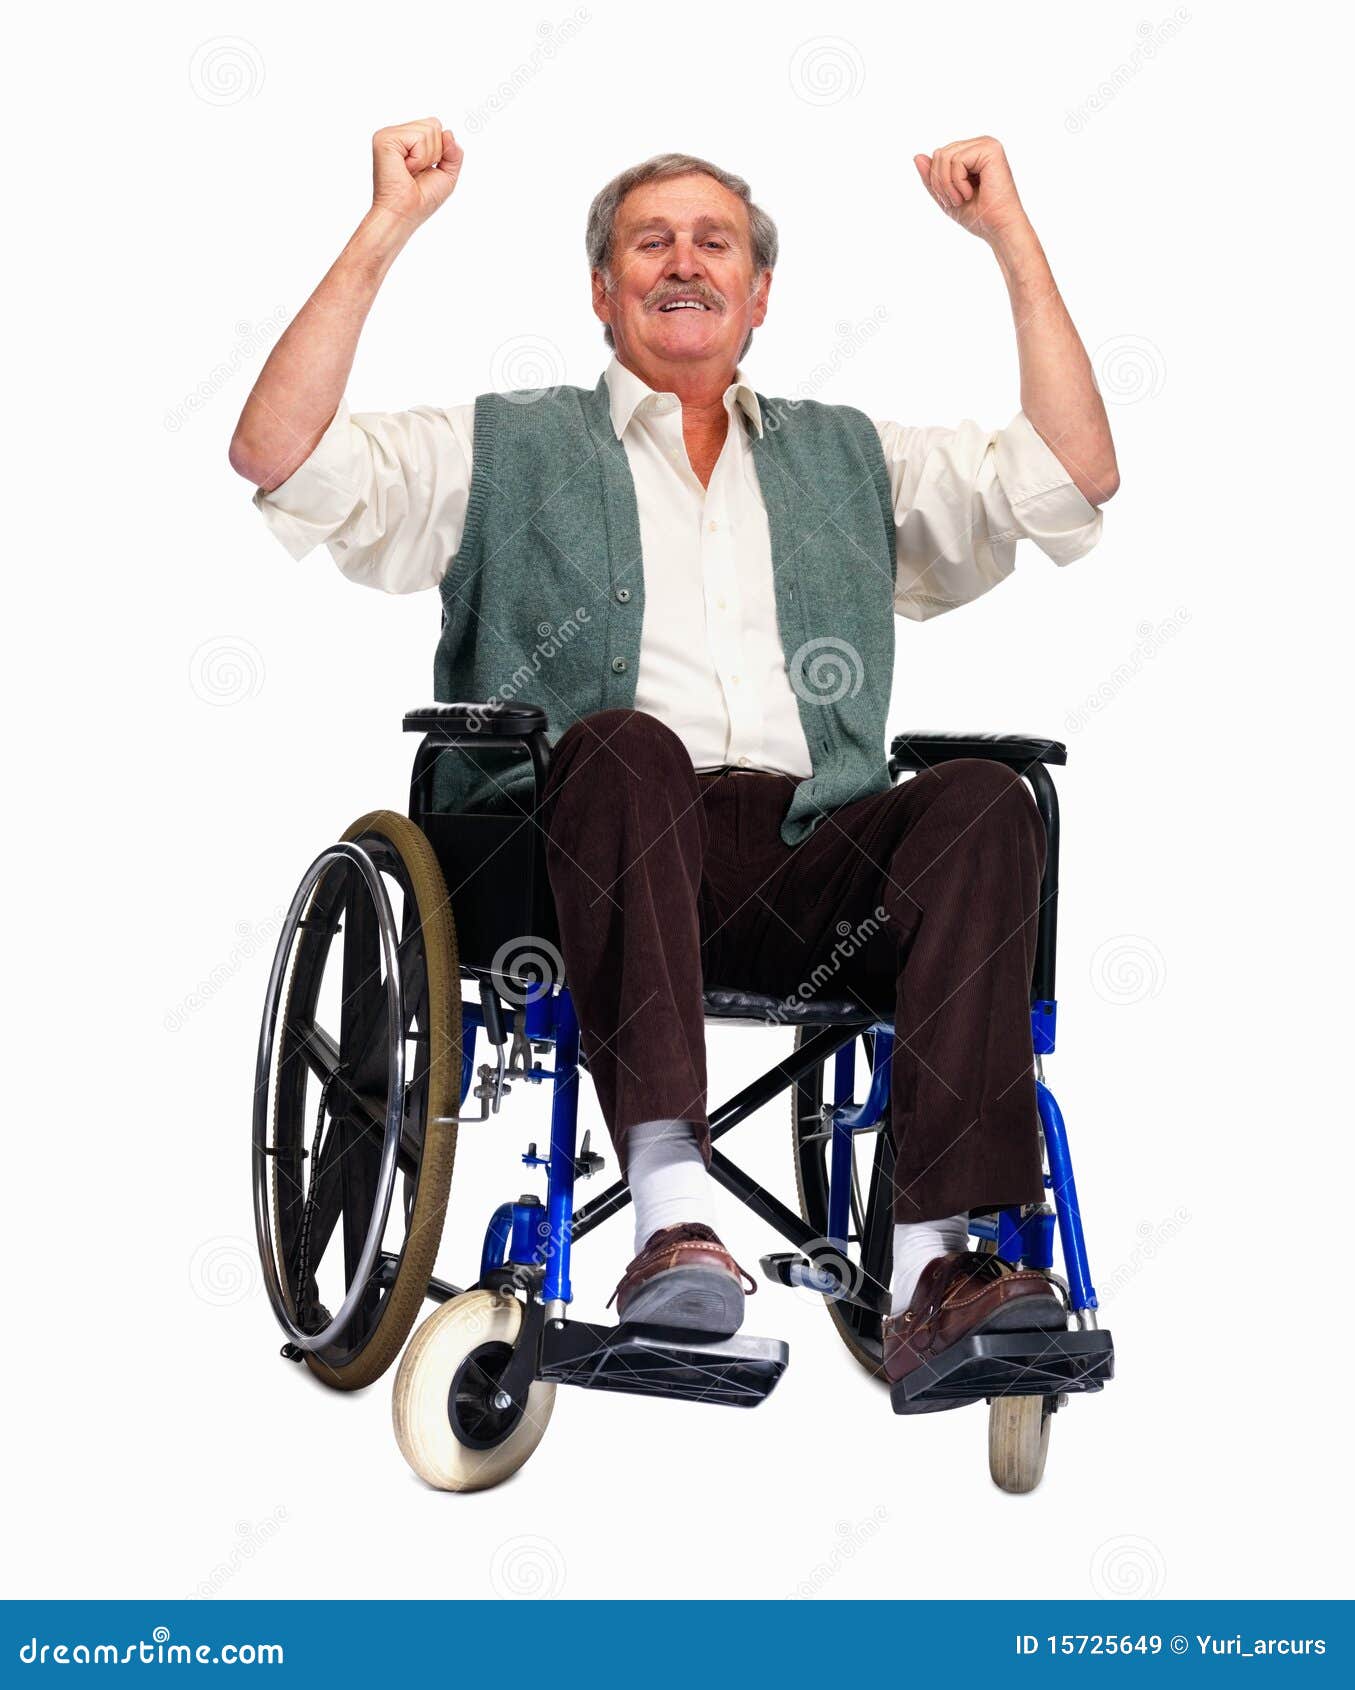 Exited Older Man Sitting Isolated on a Wheelchair Stock Image - Image ...